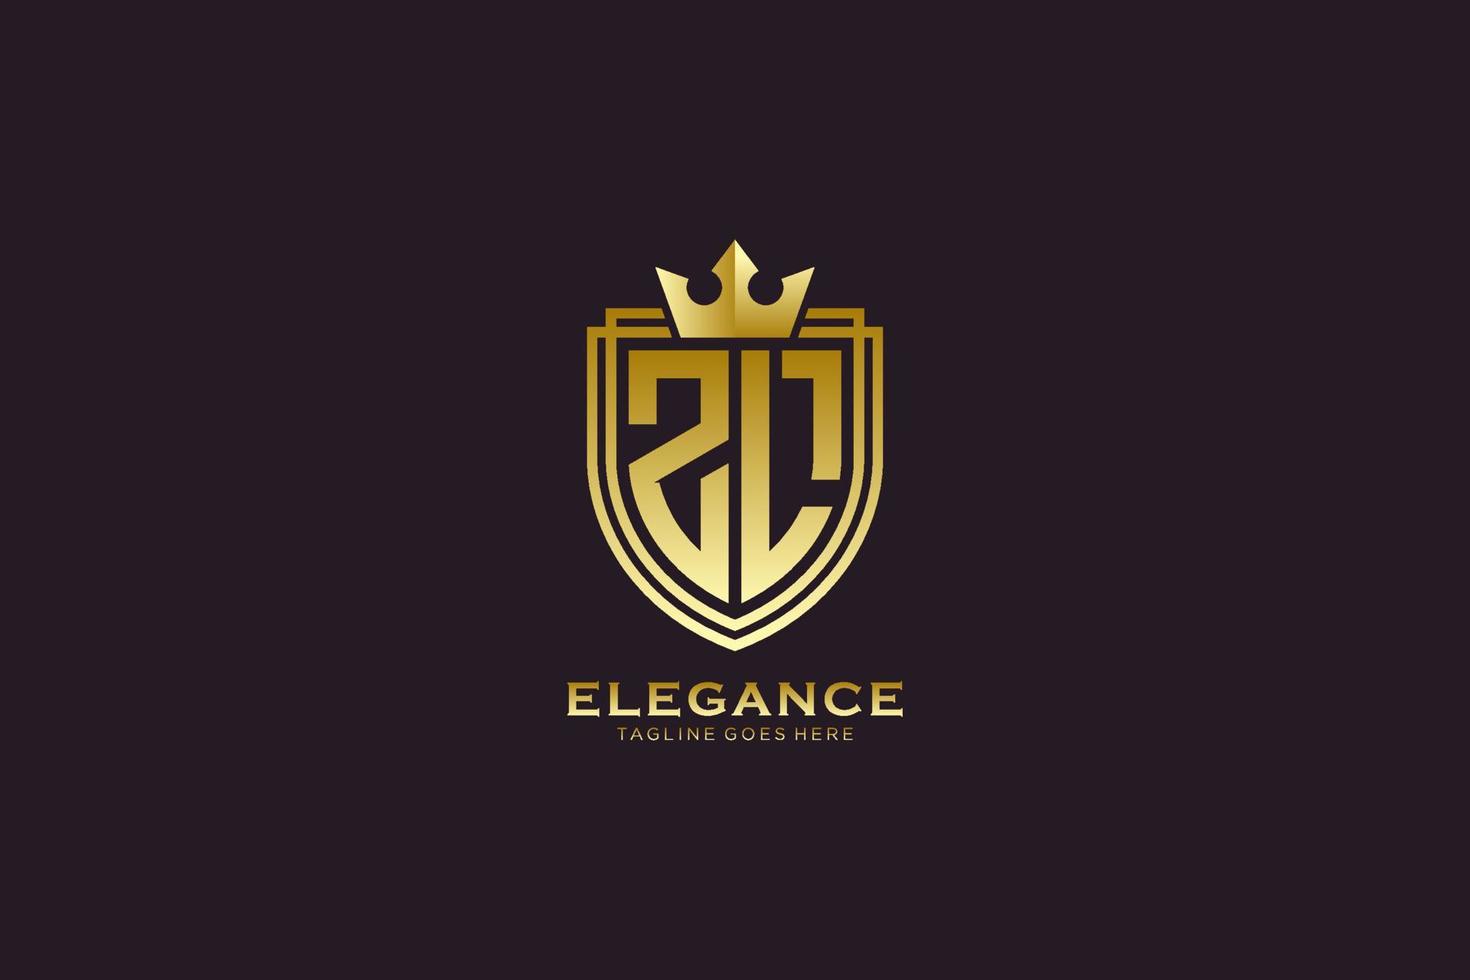 initial ZL elegant luxury monogram logo or badge template with scrolls and royal crown - perfect for luxurious branding projects vector